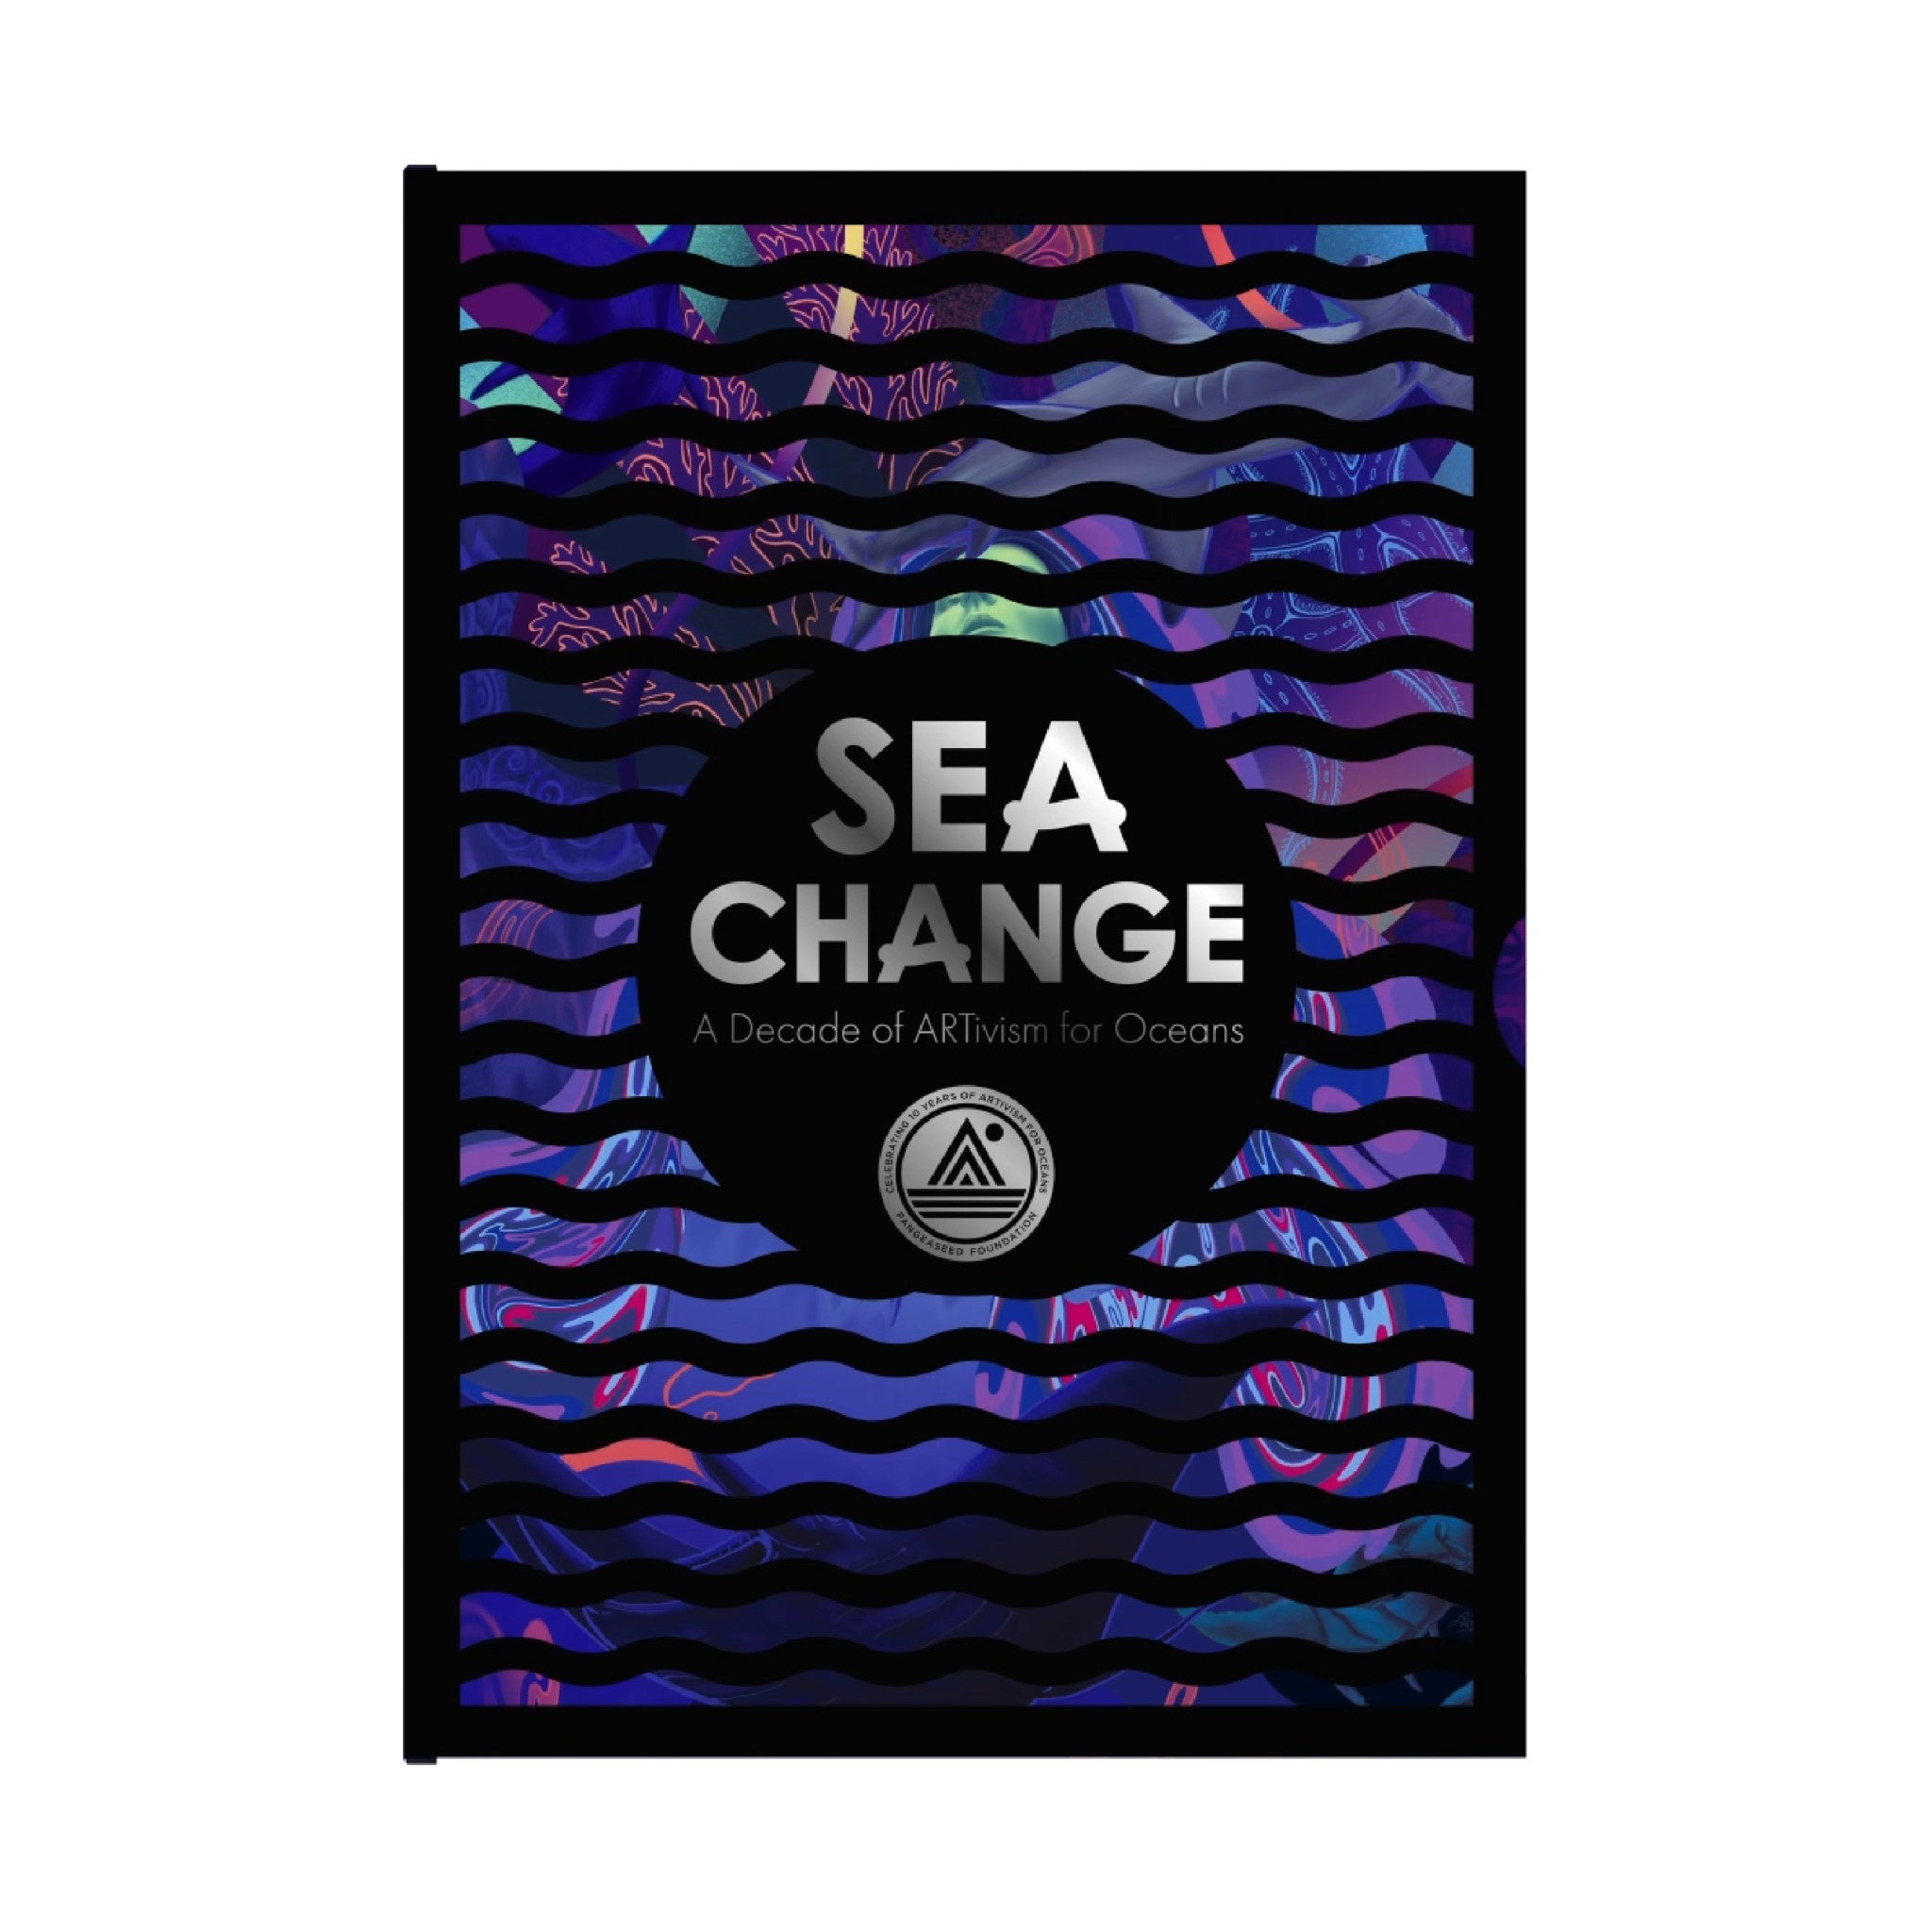 Sea Change: A Decade of ARTivism for Oceans